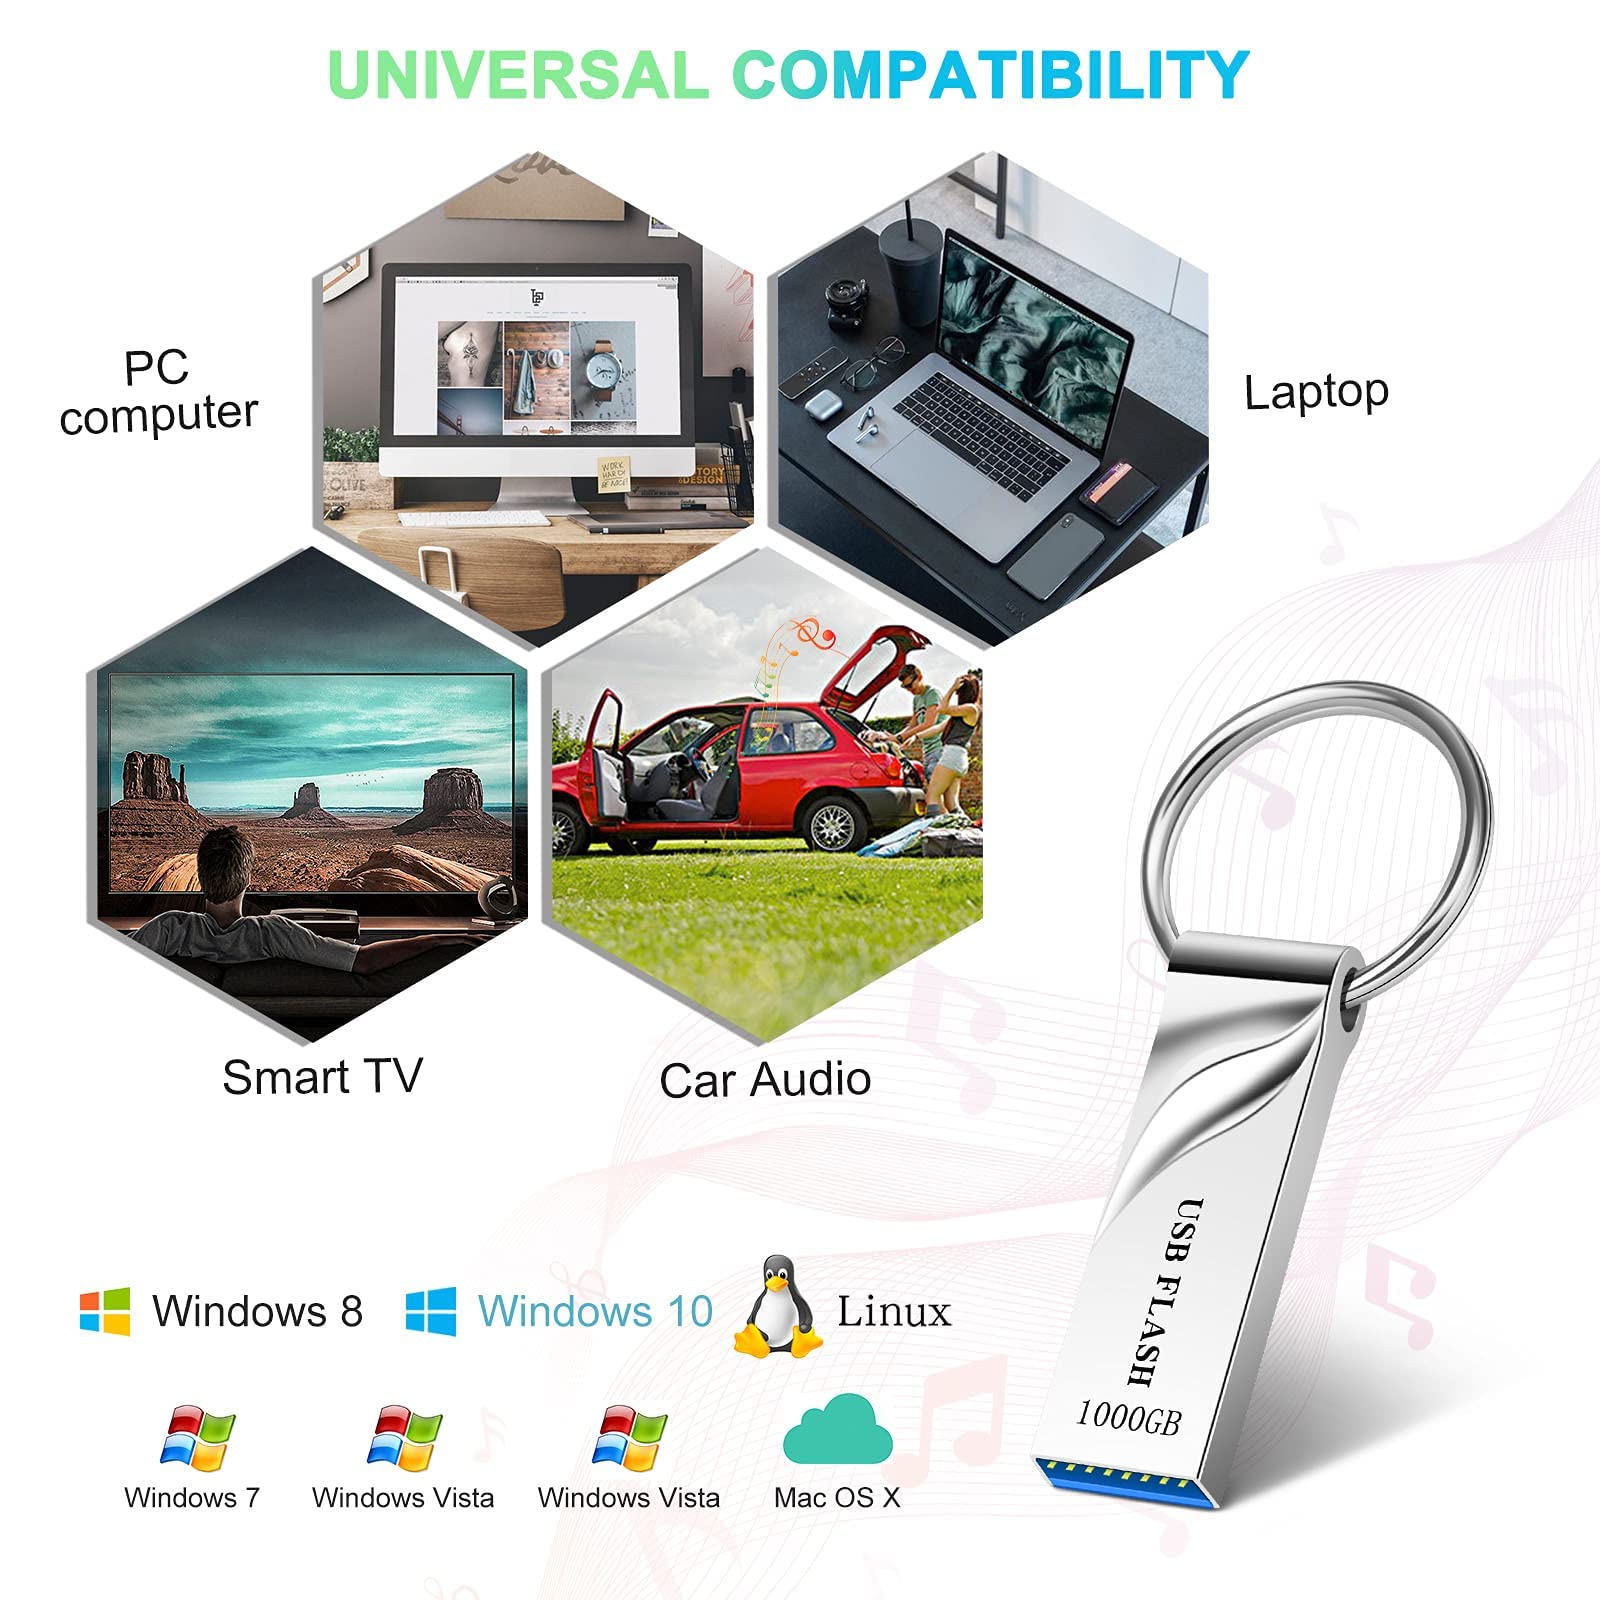 wedcook USB Flash Drive 1TB Waterproof USB 3.0 Flash Drive Portable Thumb Drive High Speed Memory Stick 1000GB with Keychain Design for Extenal Data Storage and Backup